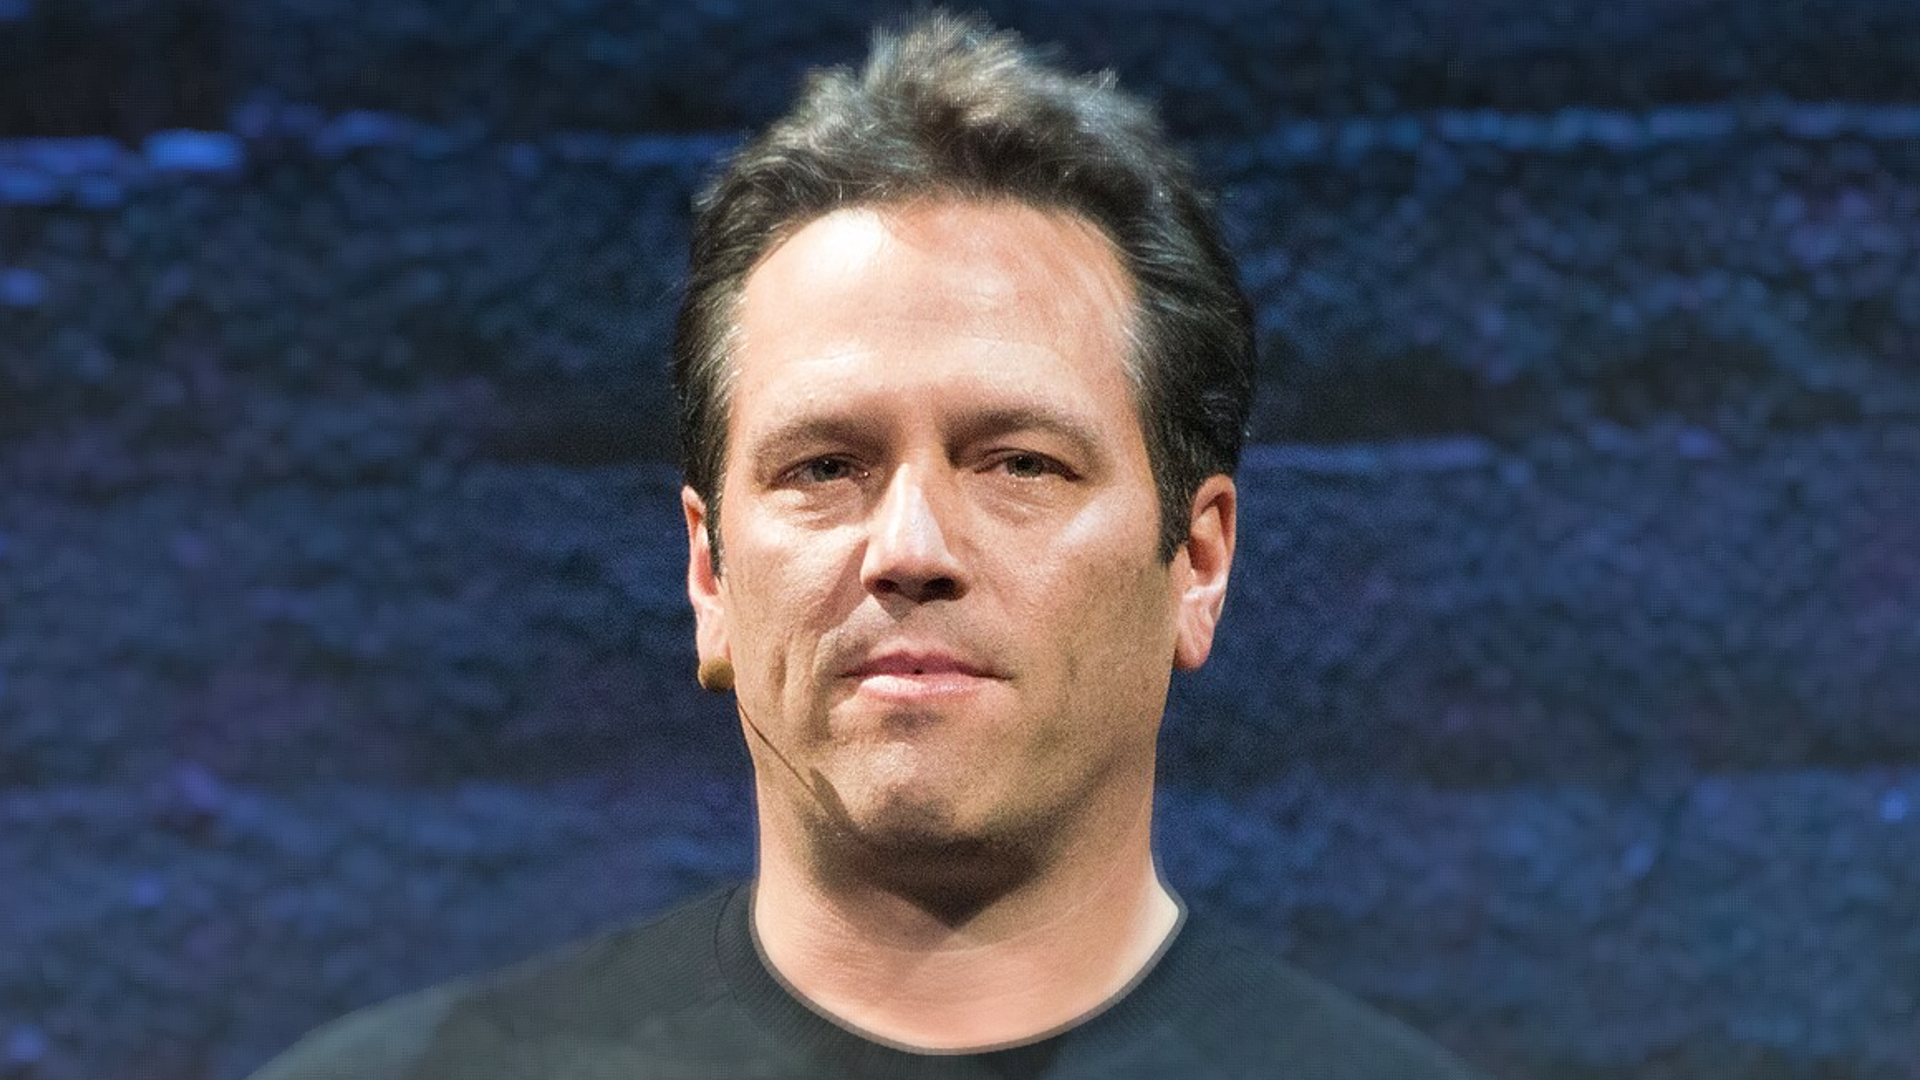 FTC says Microsoft leaked its own stuff, Phil Spencer downplays relevance  of confidential docs